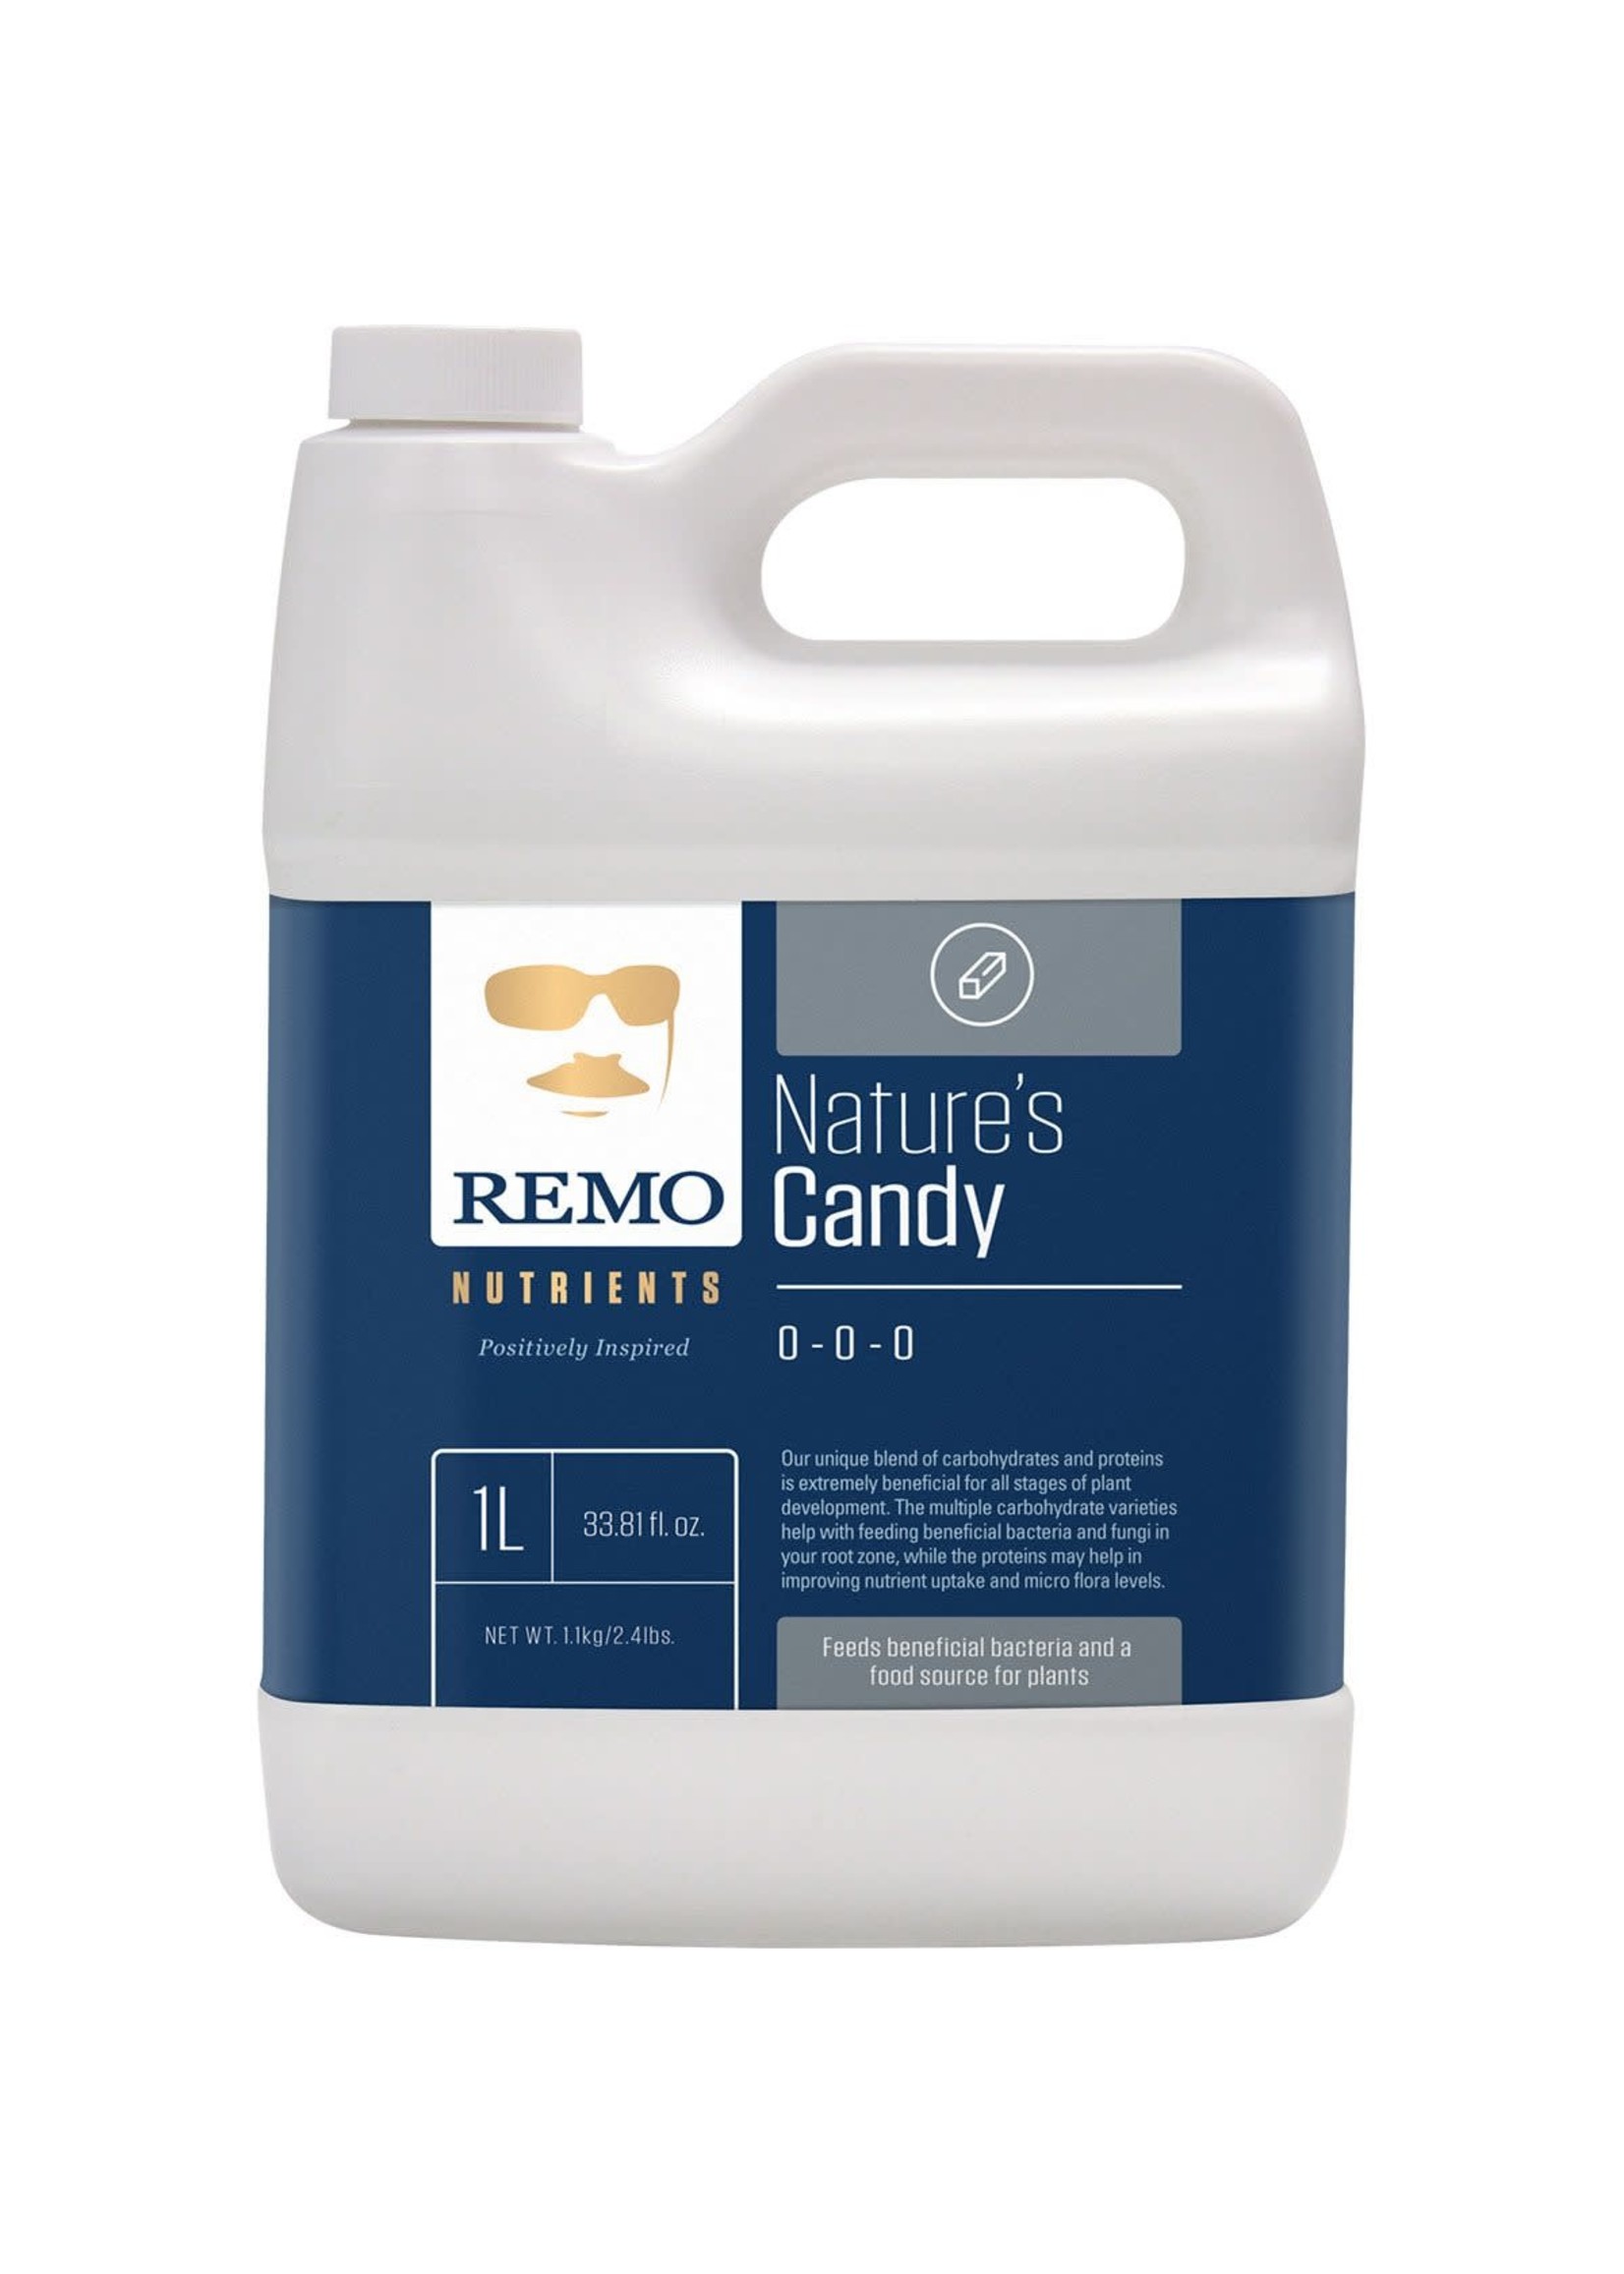 Remo Nutrients Remo Nature's Candy-1L